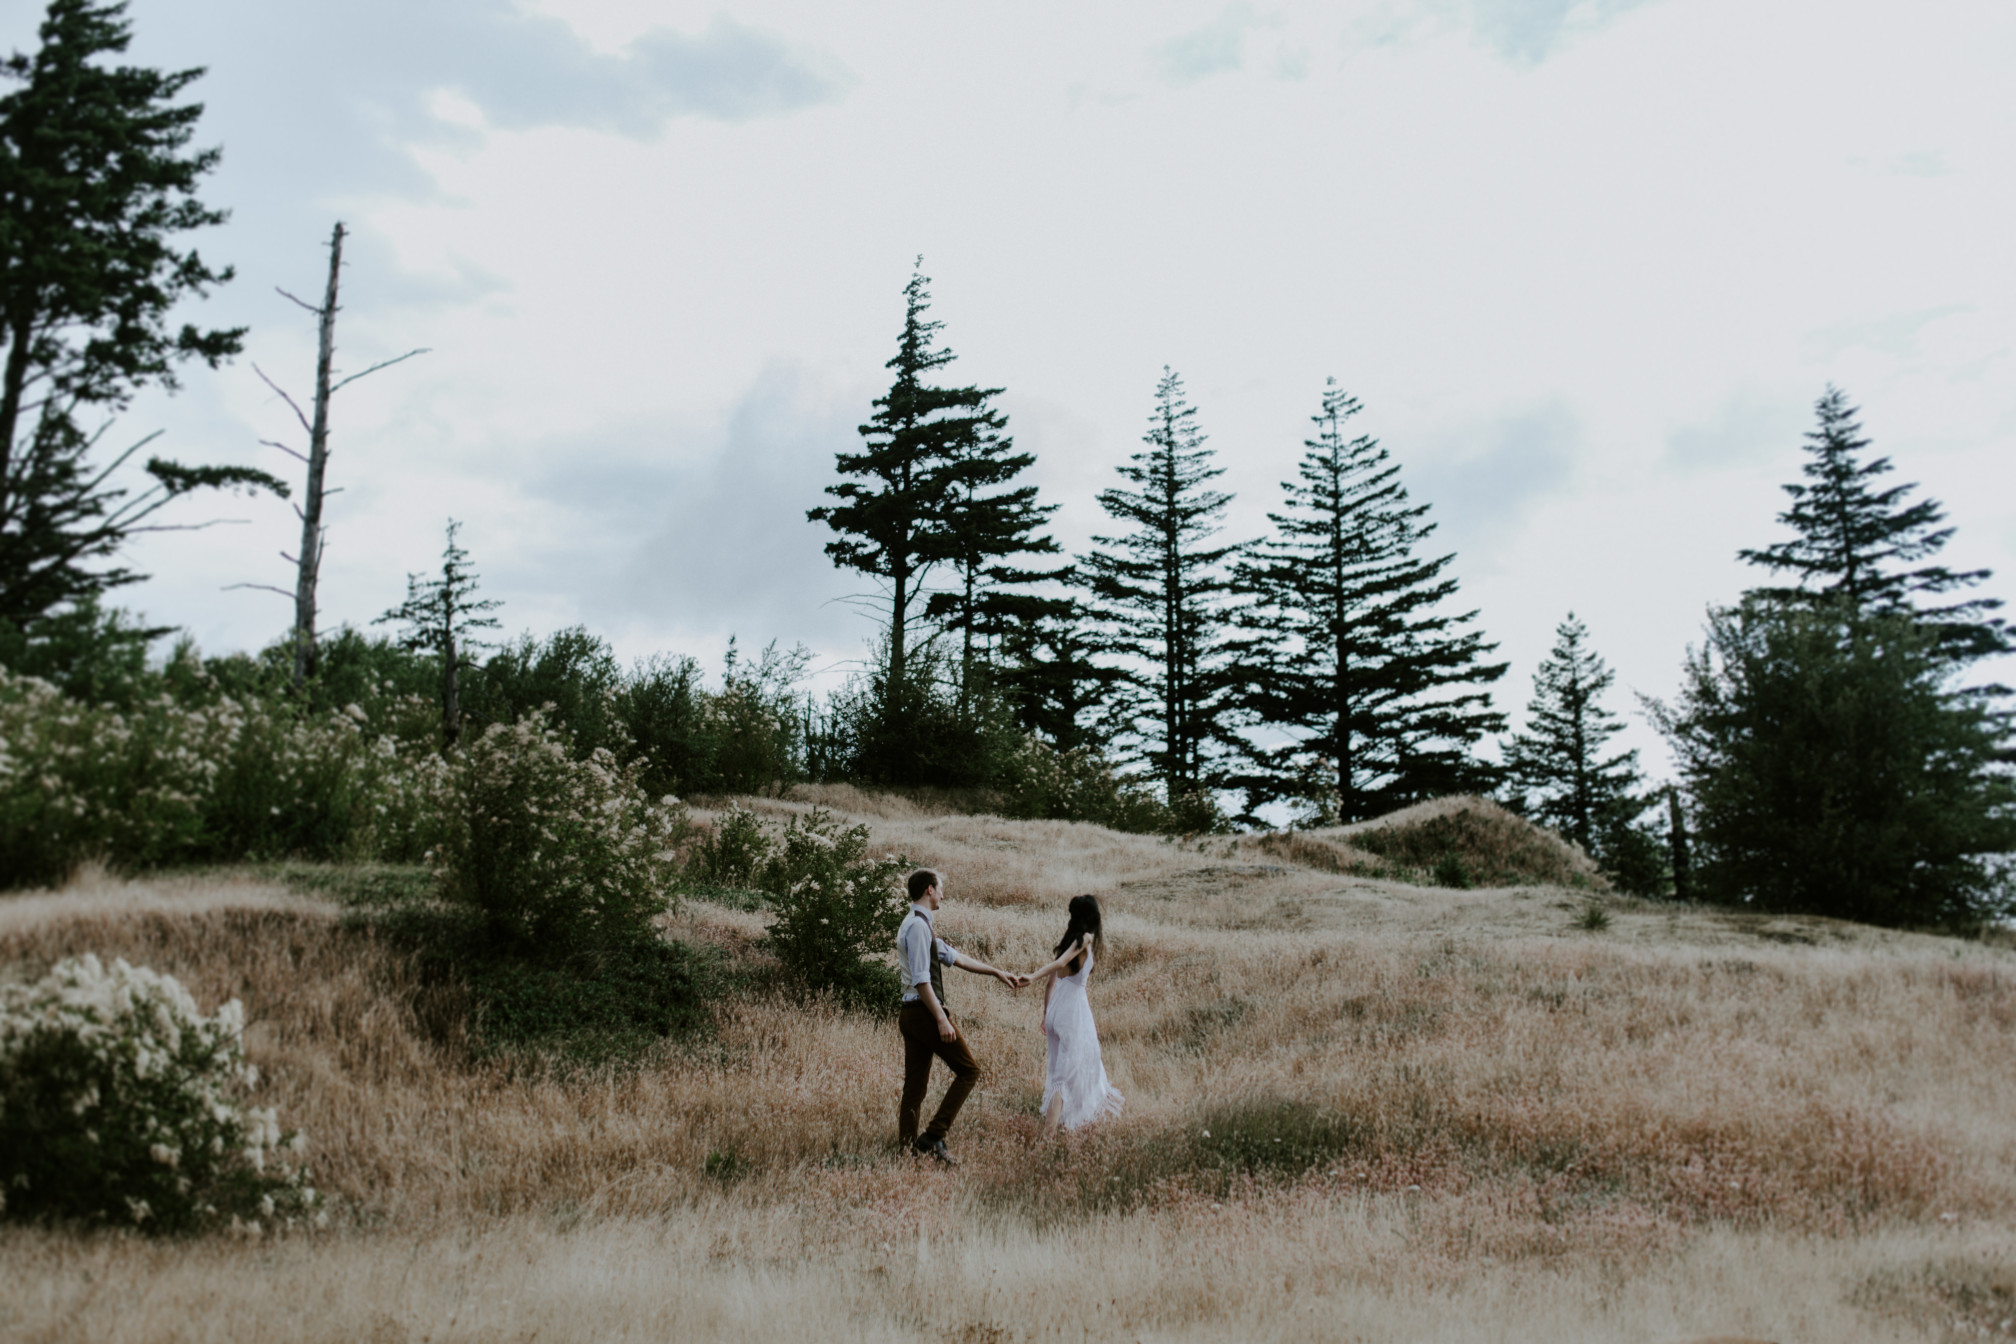 Jacob and Kimberlie hold hands. Elopement wedding photography at Cascade Locks by Sienna Plus Josh.